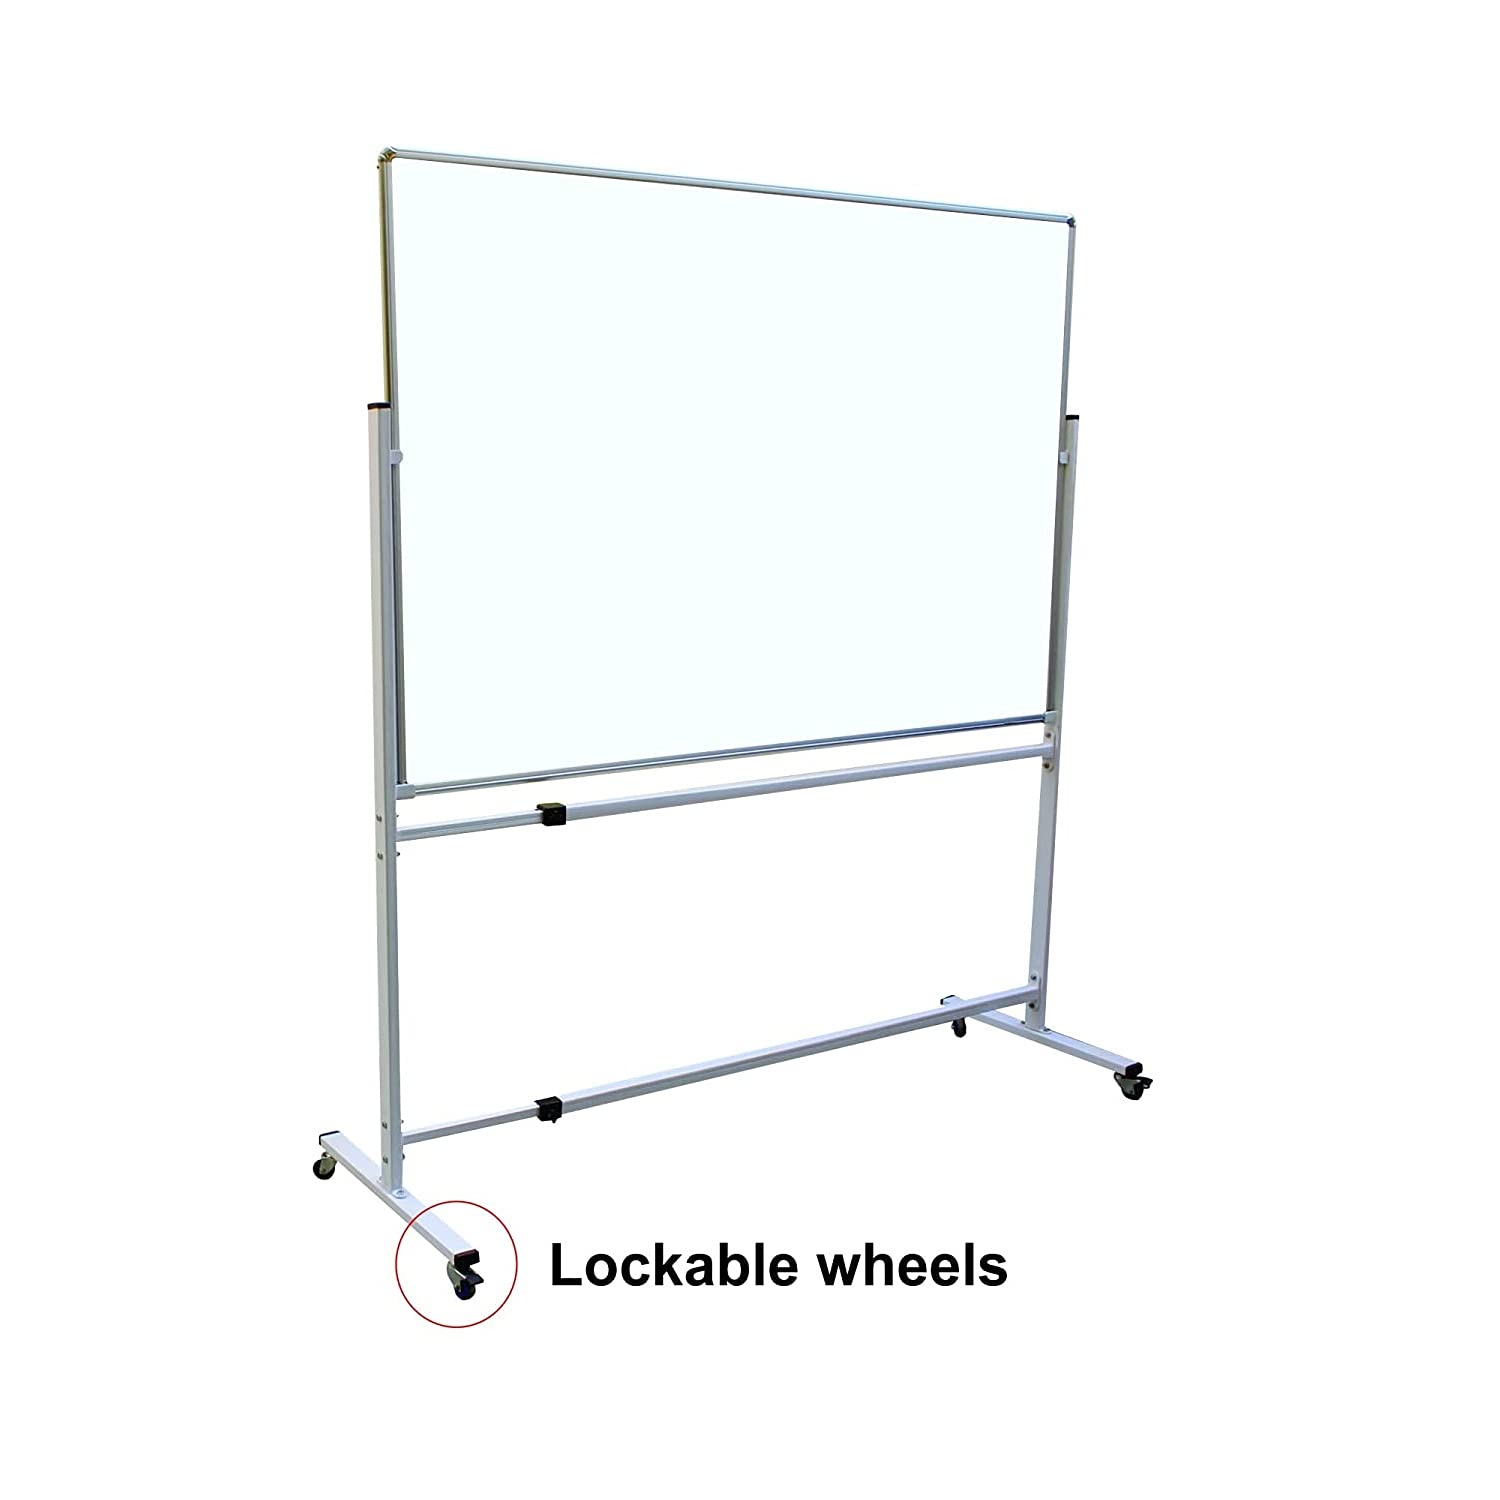 OBASIX® Superior Series White Board (4x6 Feet) Magnetic | Natural Finesse Heavy Aluminium Frame with Movable and Adjustable Whiteboard Stand SMWBWS120180